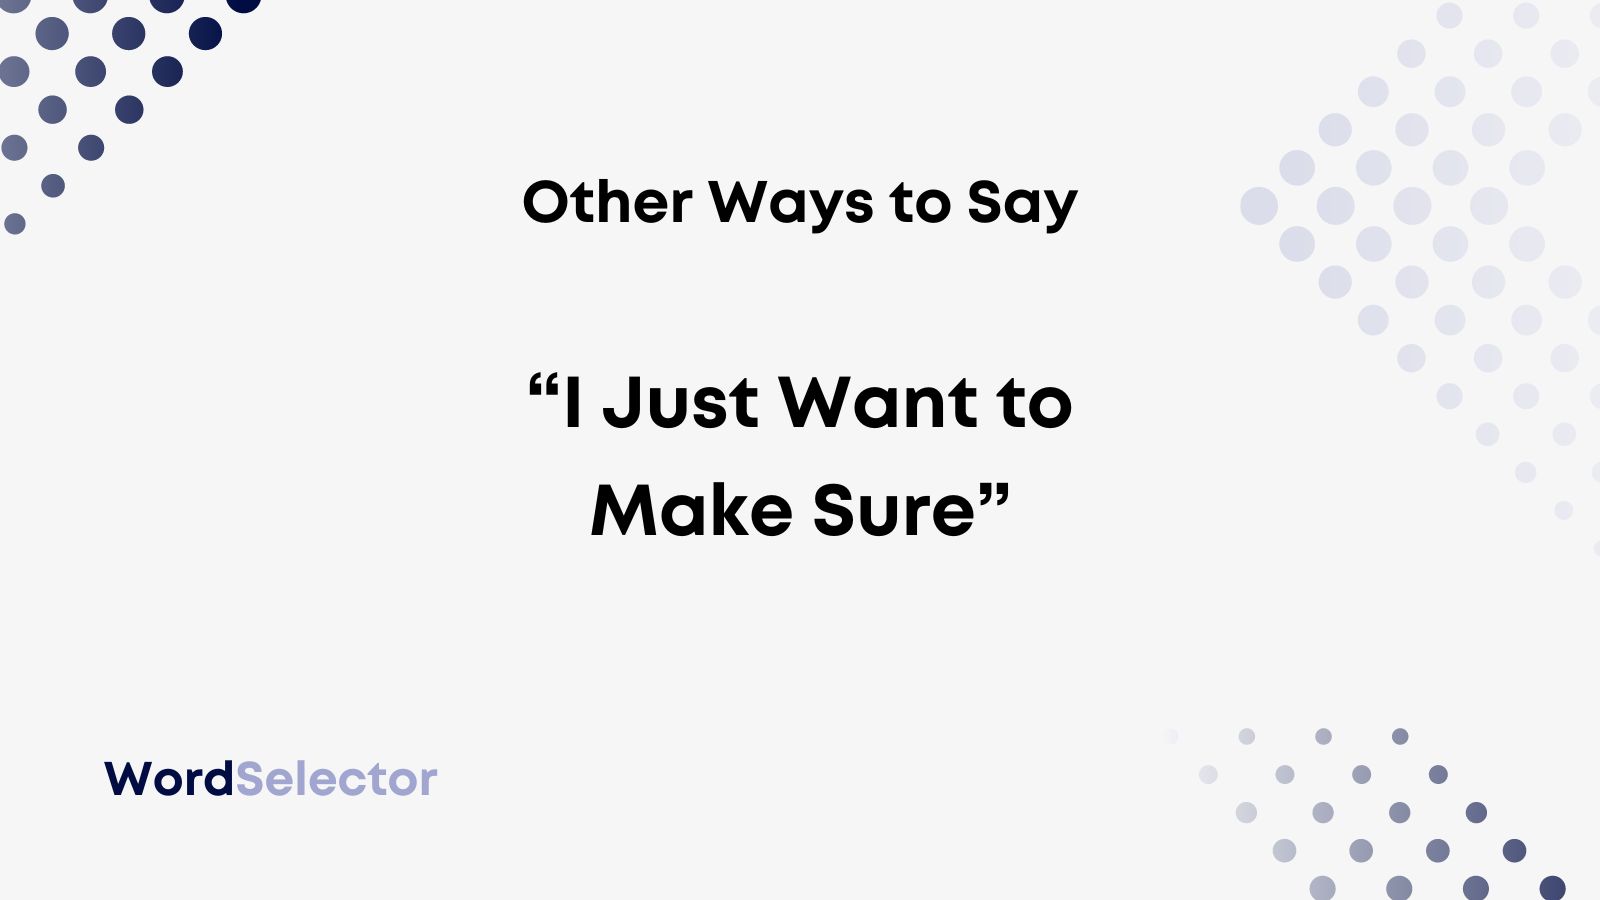 17 Other Ways to Say “I Just Want to Make Sure” - WordSelector